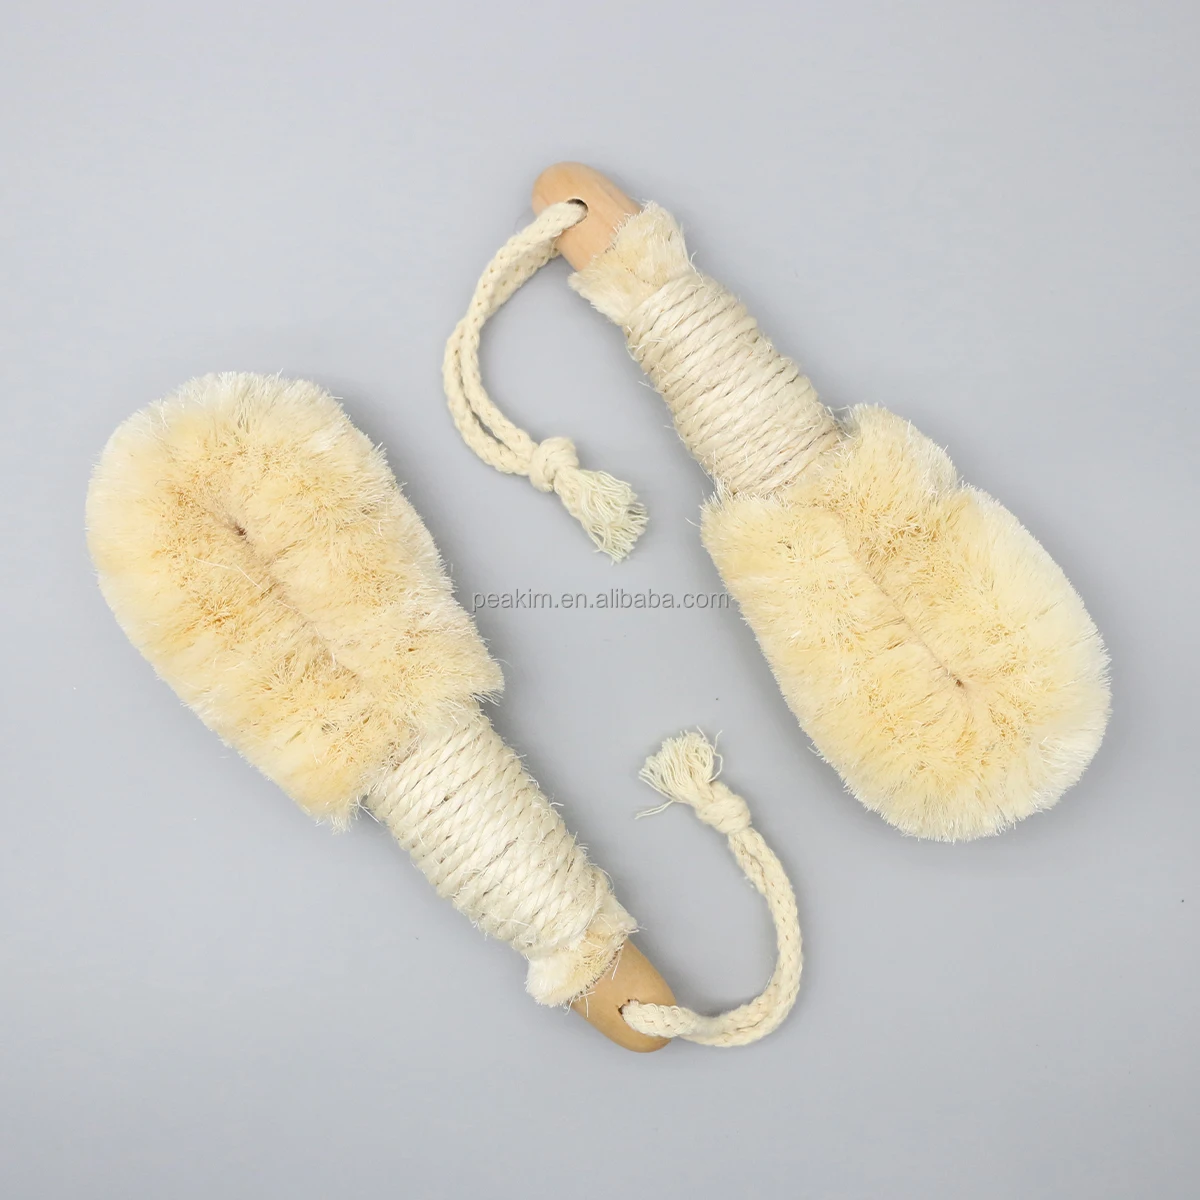 

High Quality Natural Sisal Dry Skin Brush for Cellulite Exfoliating Body Scrubber Massage Wooden Dry Bath Skin Brush, Natural color